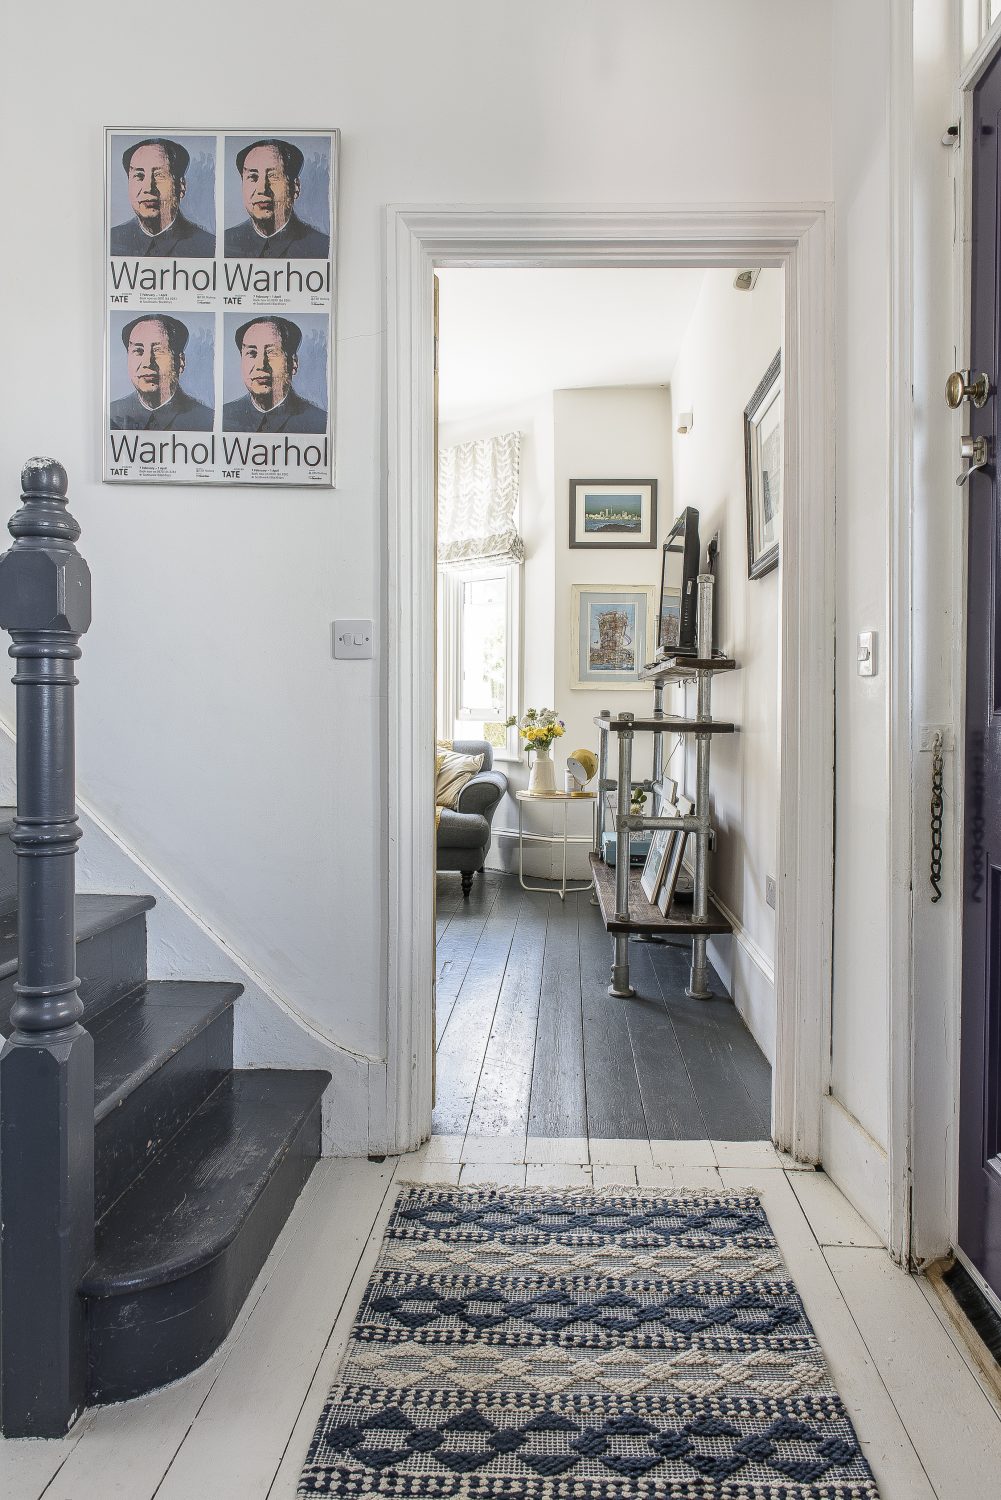 A clutter-free entrance hall leads into the dining room on one side and sitting room on the other